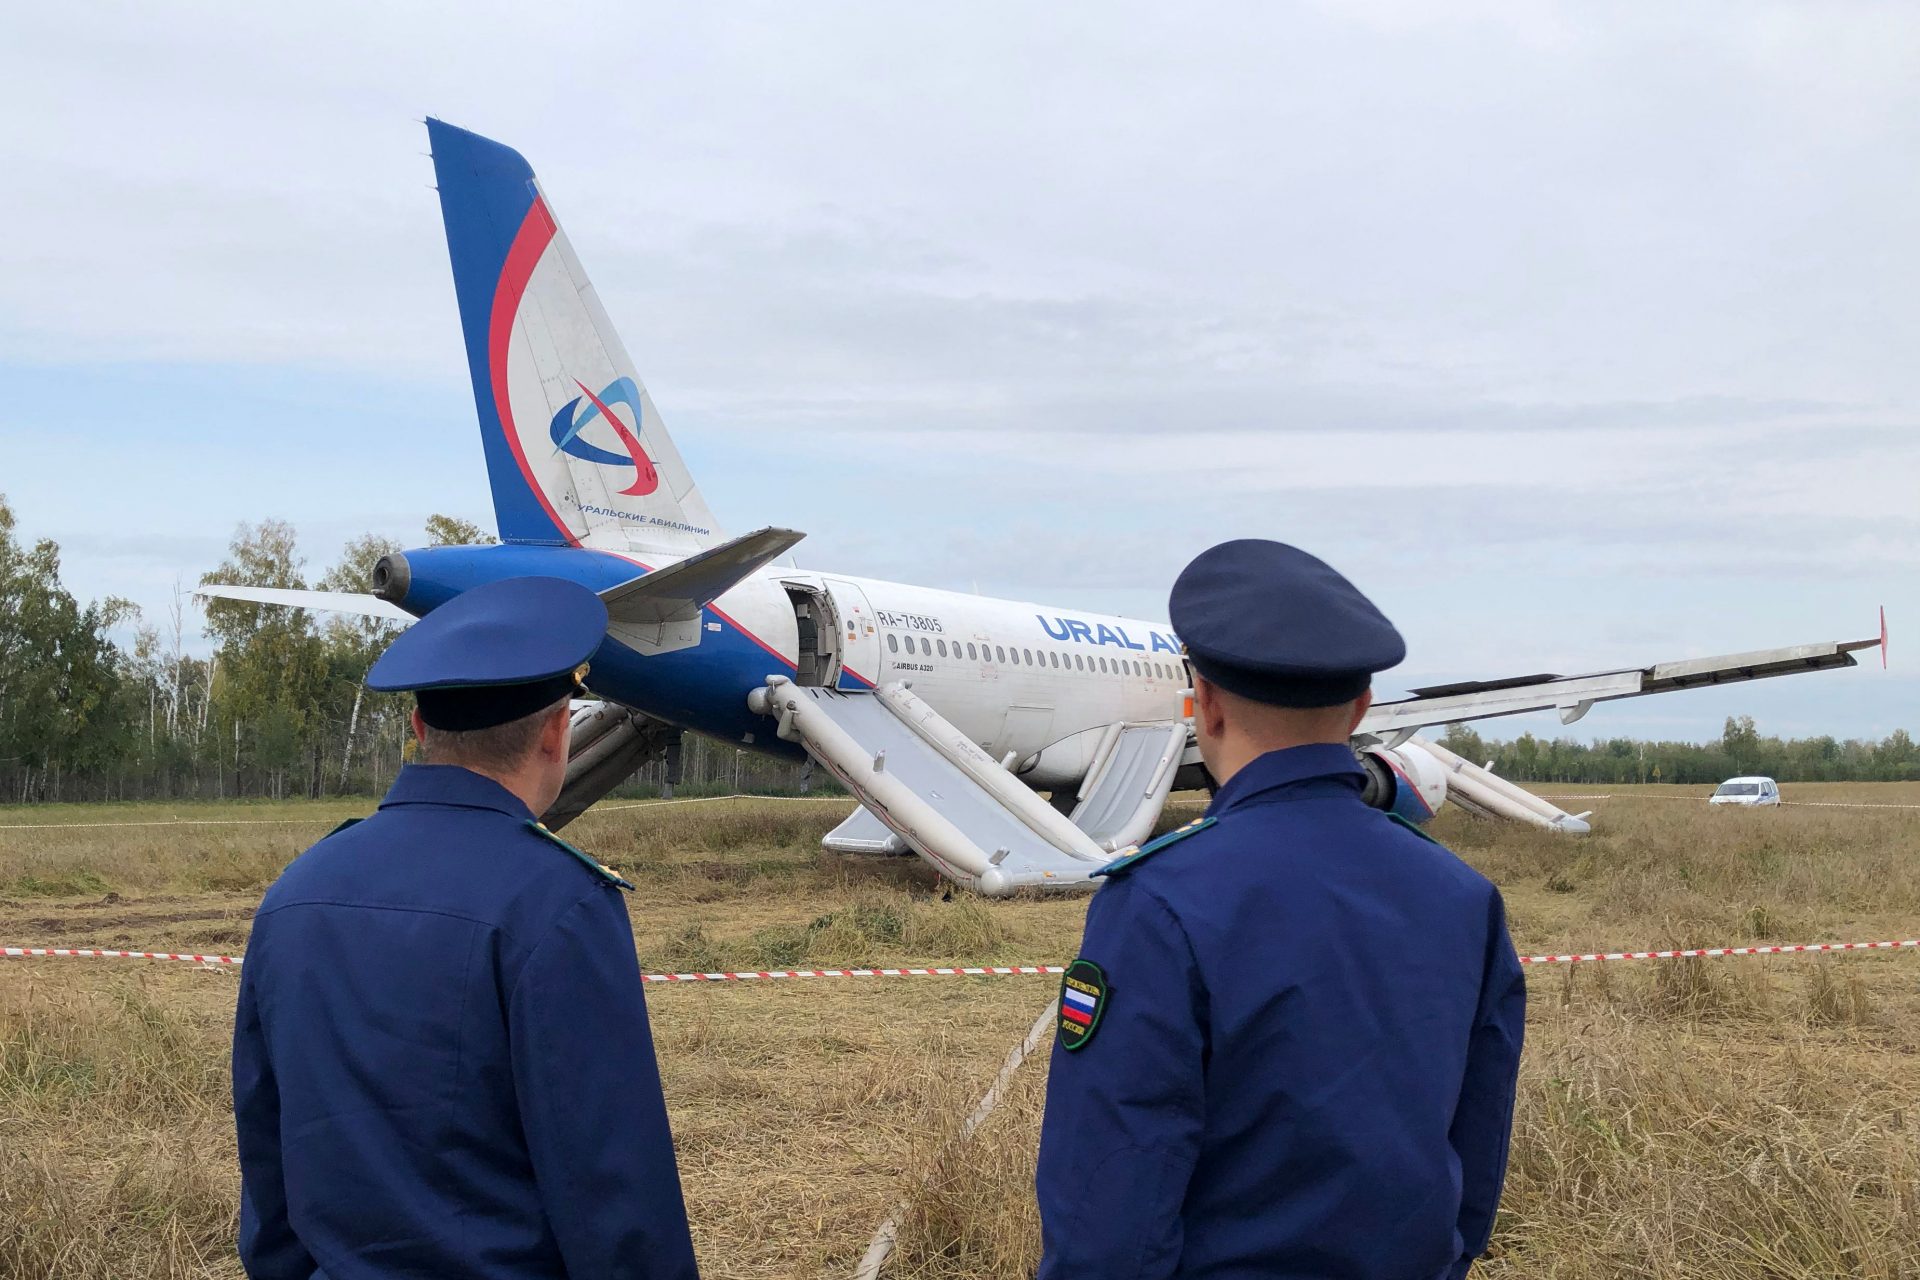 The biggest problems for Russian airlines